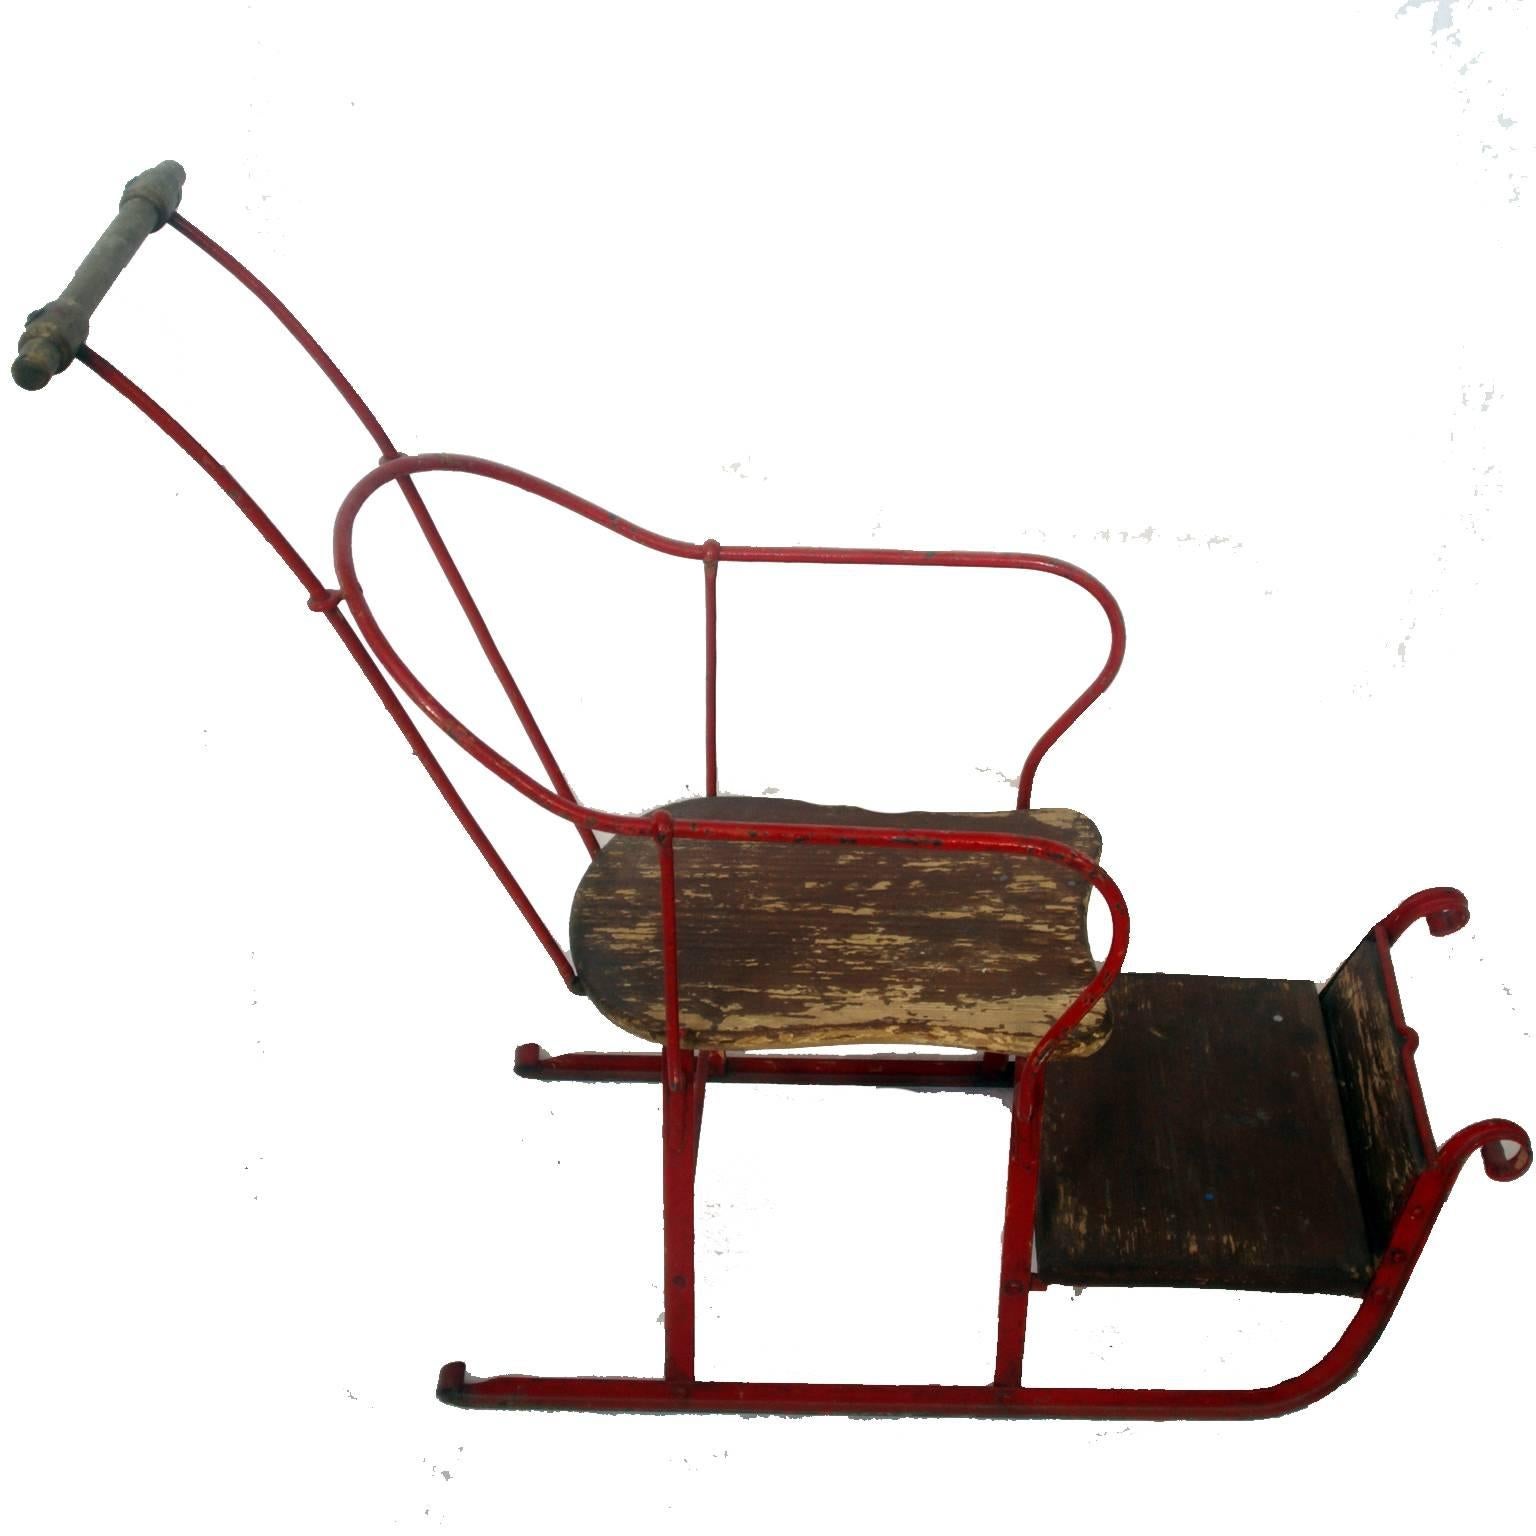 Early 20th century east European sleigh.
Blacksmith made push sleigh. Not a toy but used for pushing a baby or toddler on snow and when skating on the river. Original red paint and wooden seat. The piece is in exactly as found condition with no